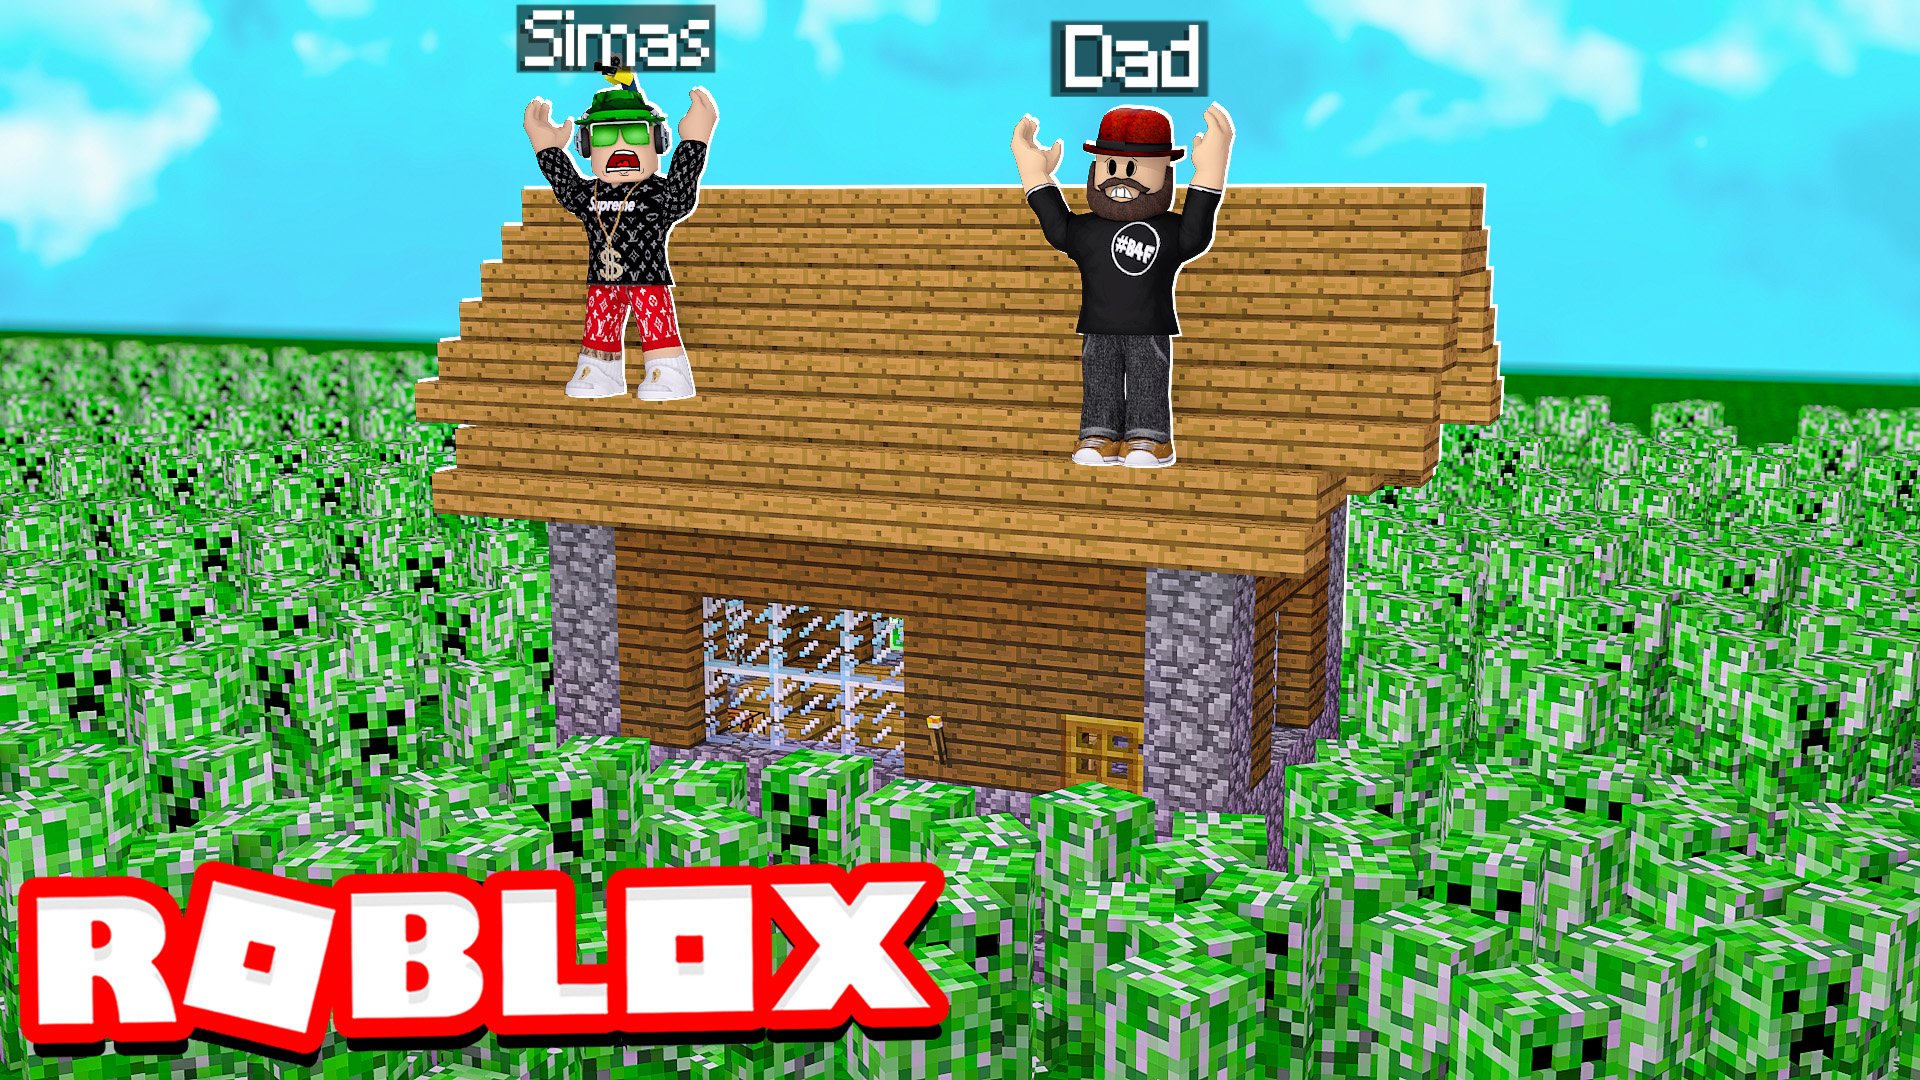 Blox4fun On Twitter Build To Survive The Creeper Chaos Https T Co Gaooeiyph3 Youtubegaming Roblox Minecraft - build to survive creepers in roblox